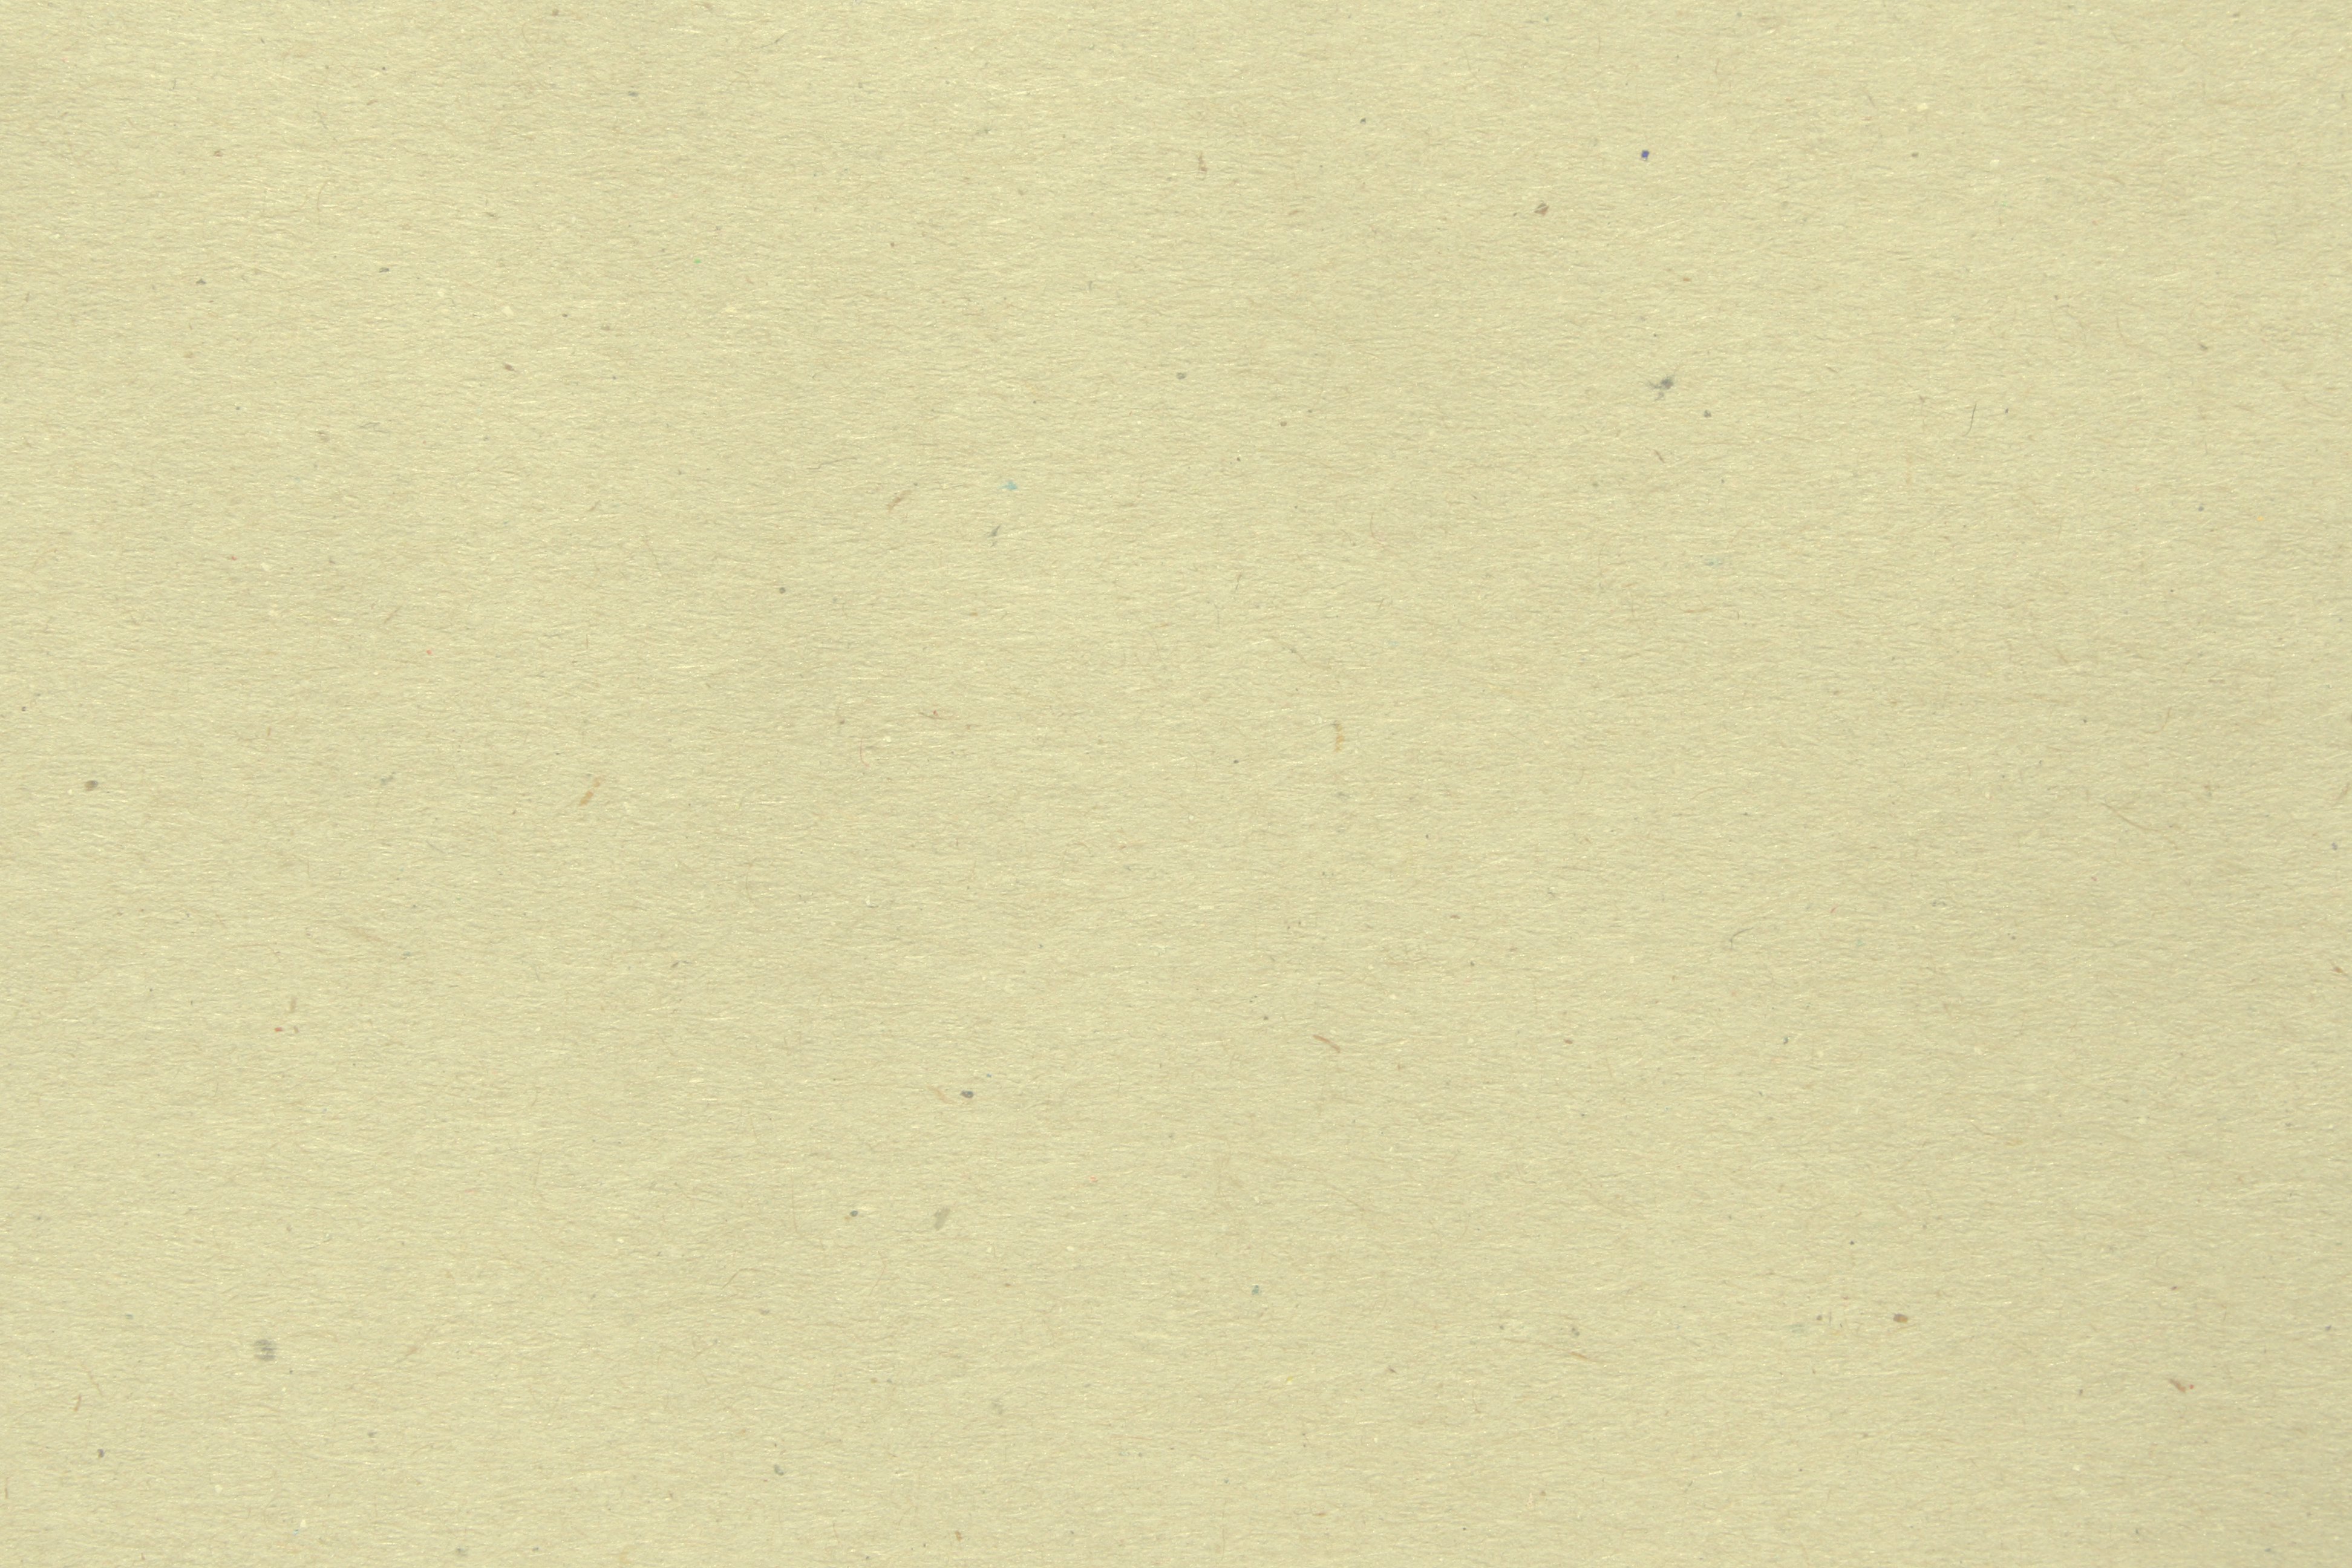 Ivory Off White Paper Texture with Flecks Picture | Free Photograph |  Photos Public Domain